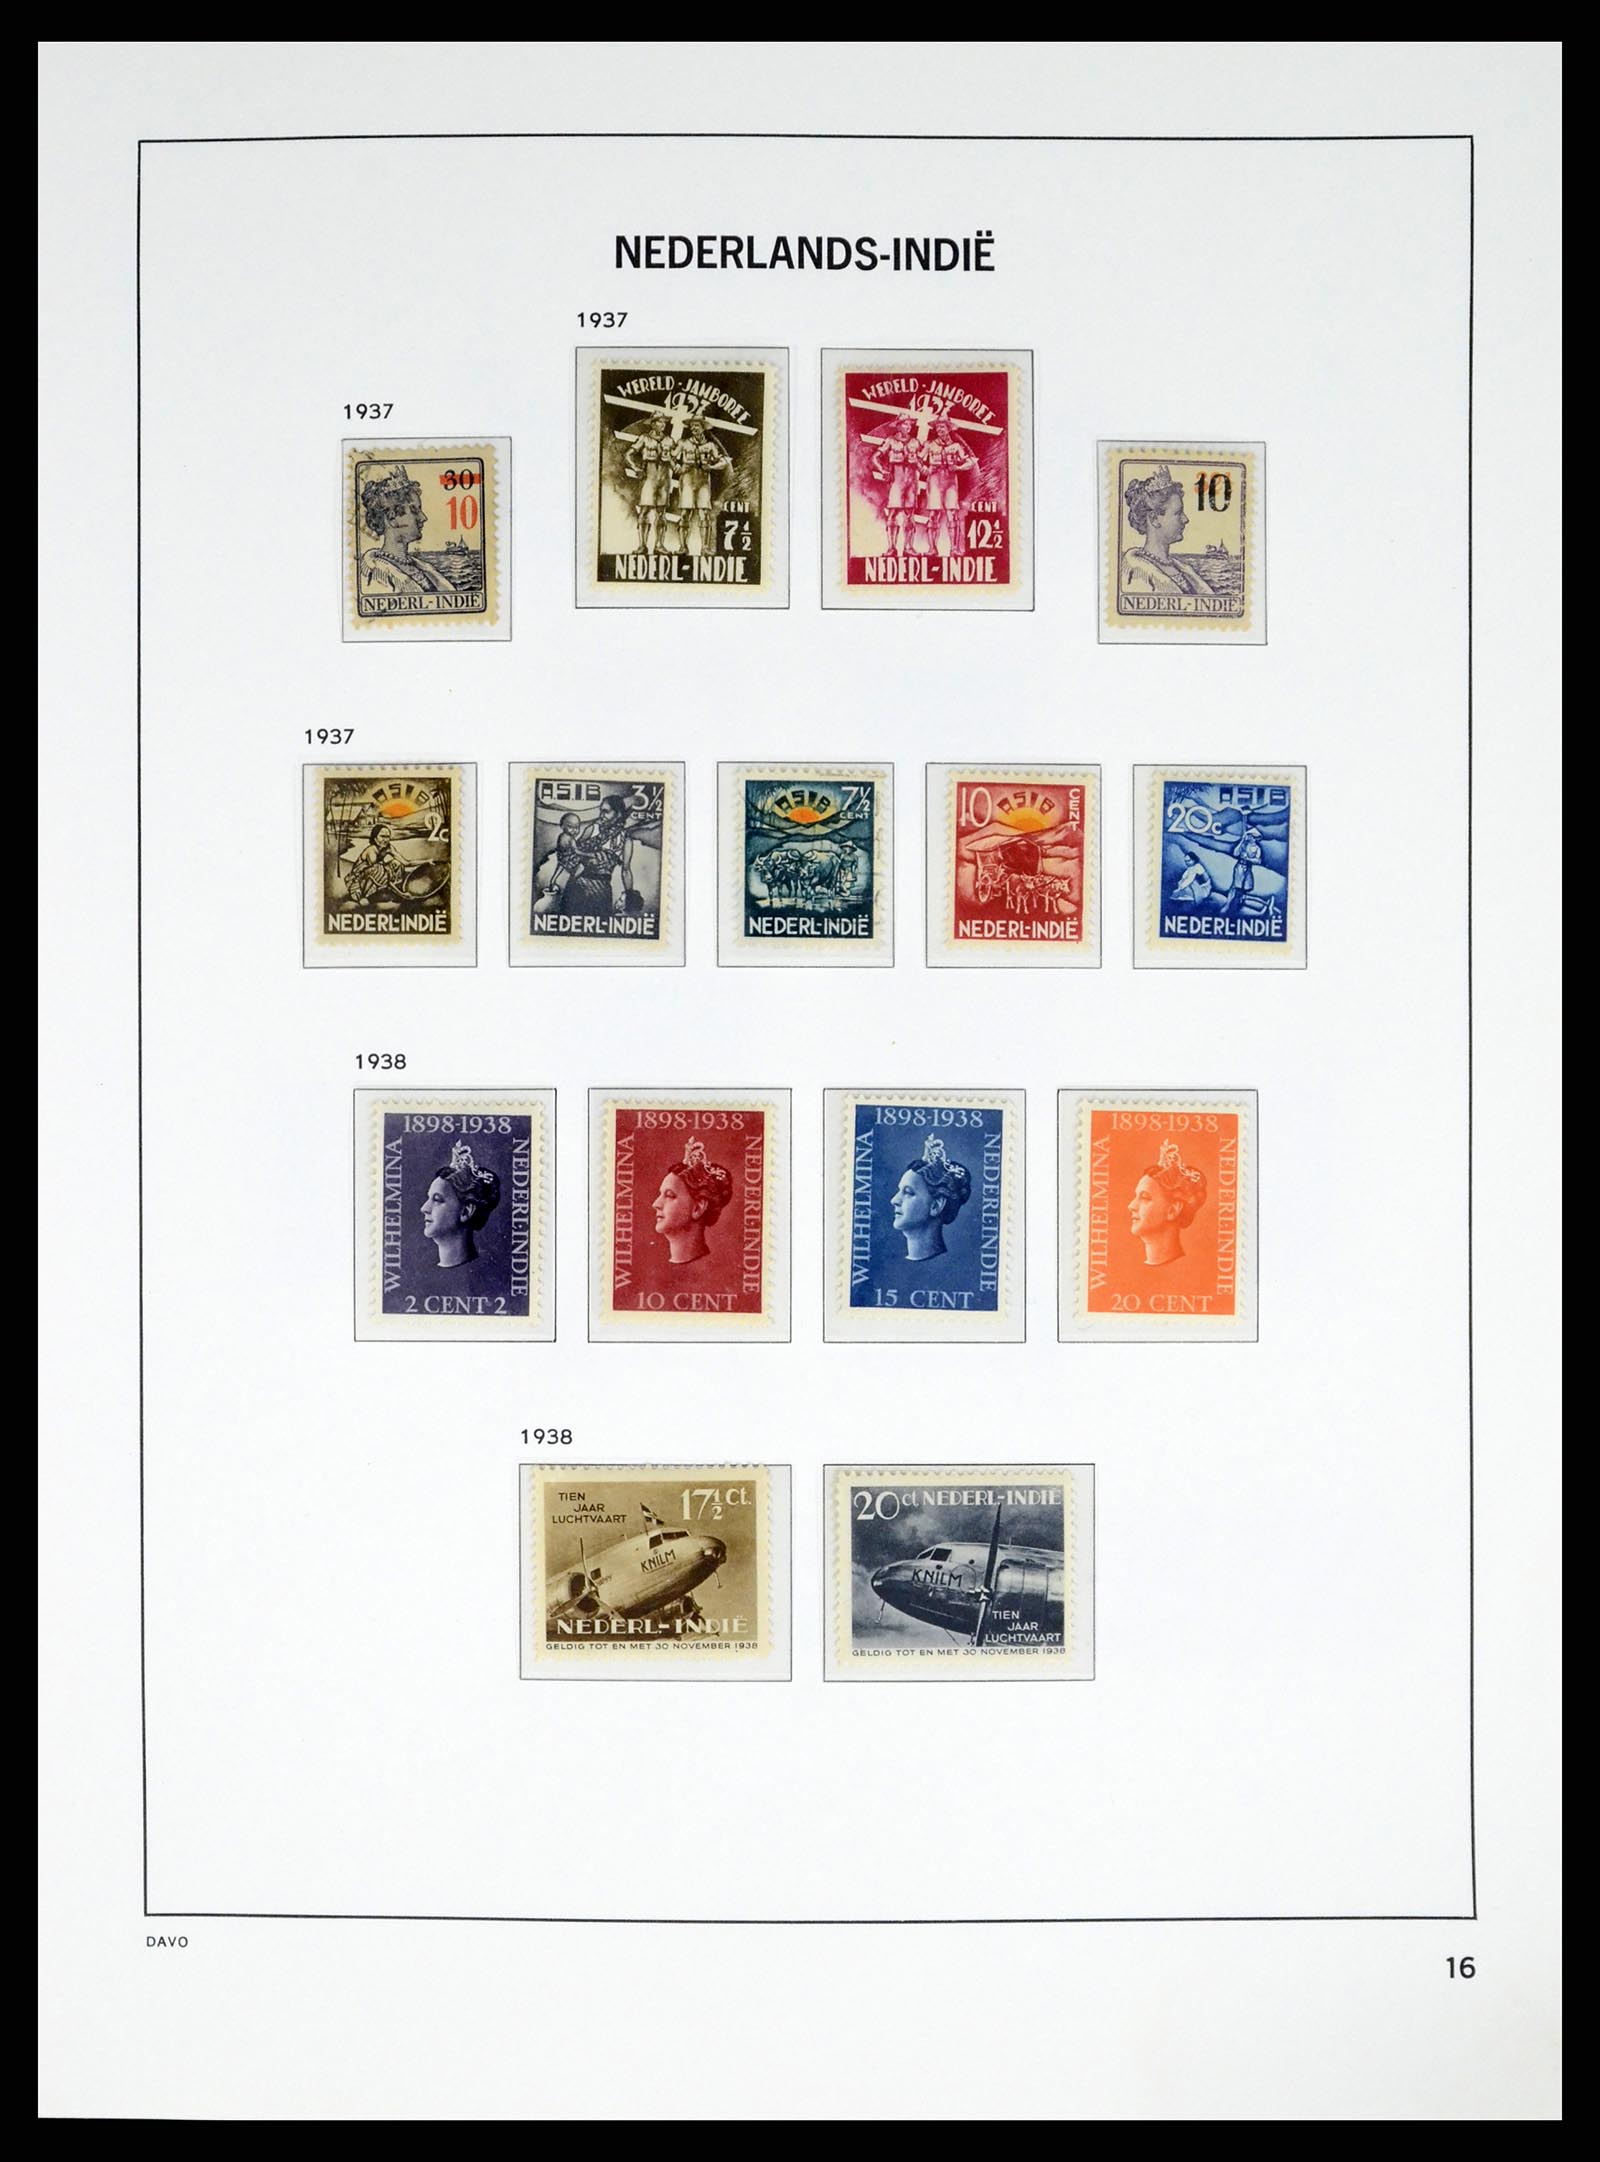 37332 016 - Stamp collection 37332 Dutch East Indies 1864-1949.